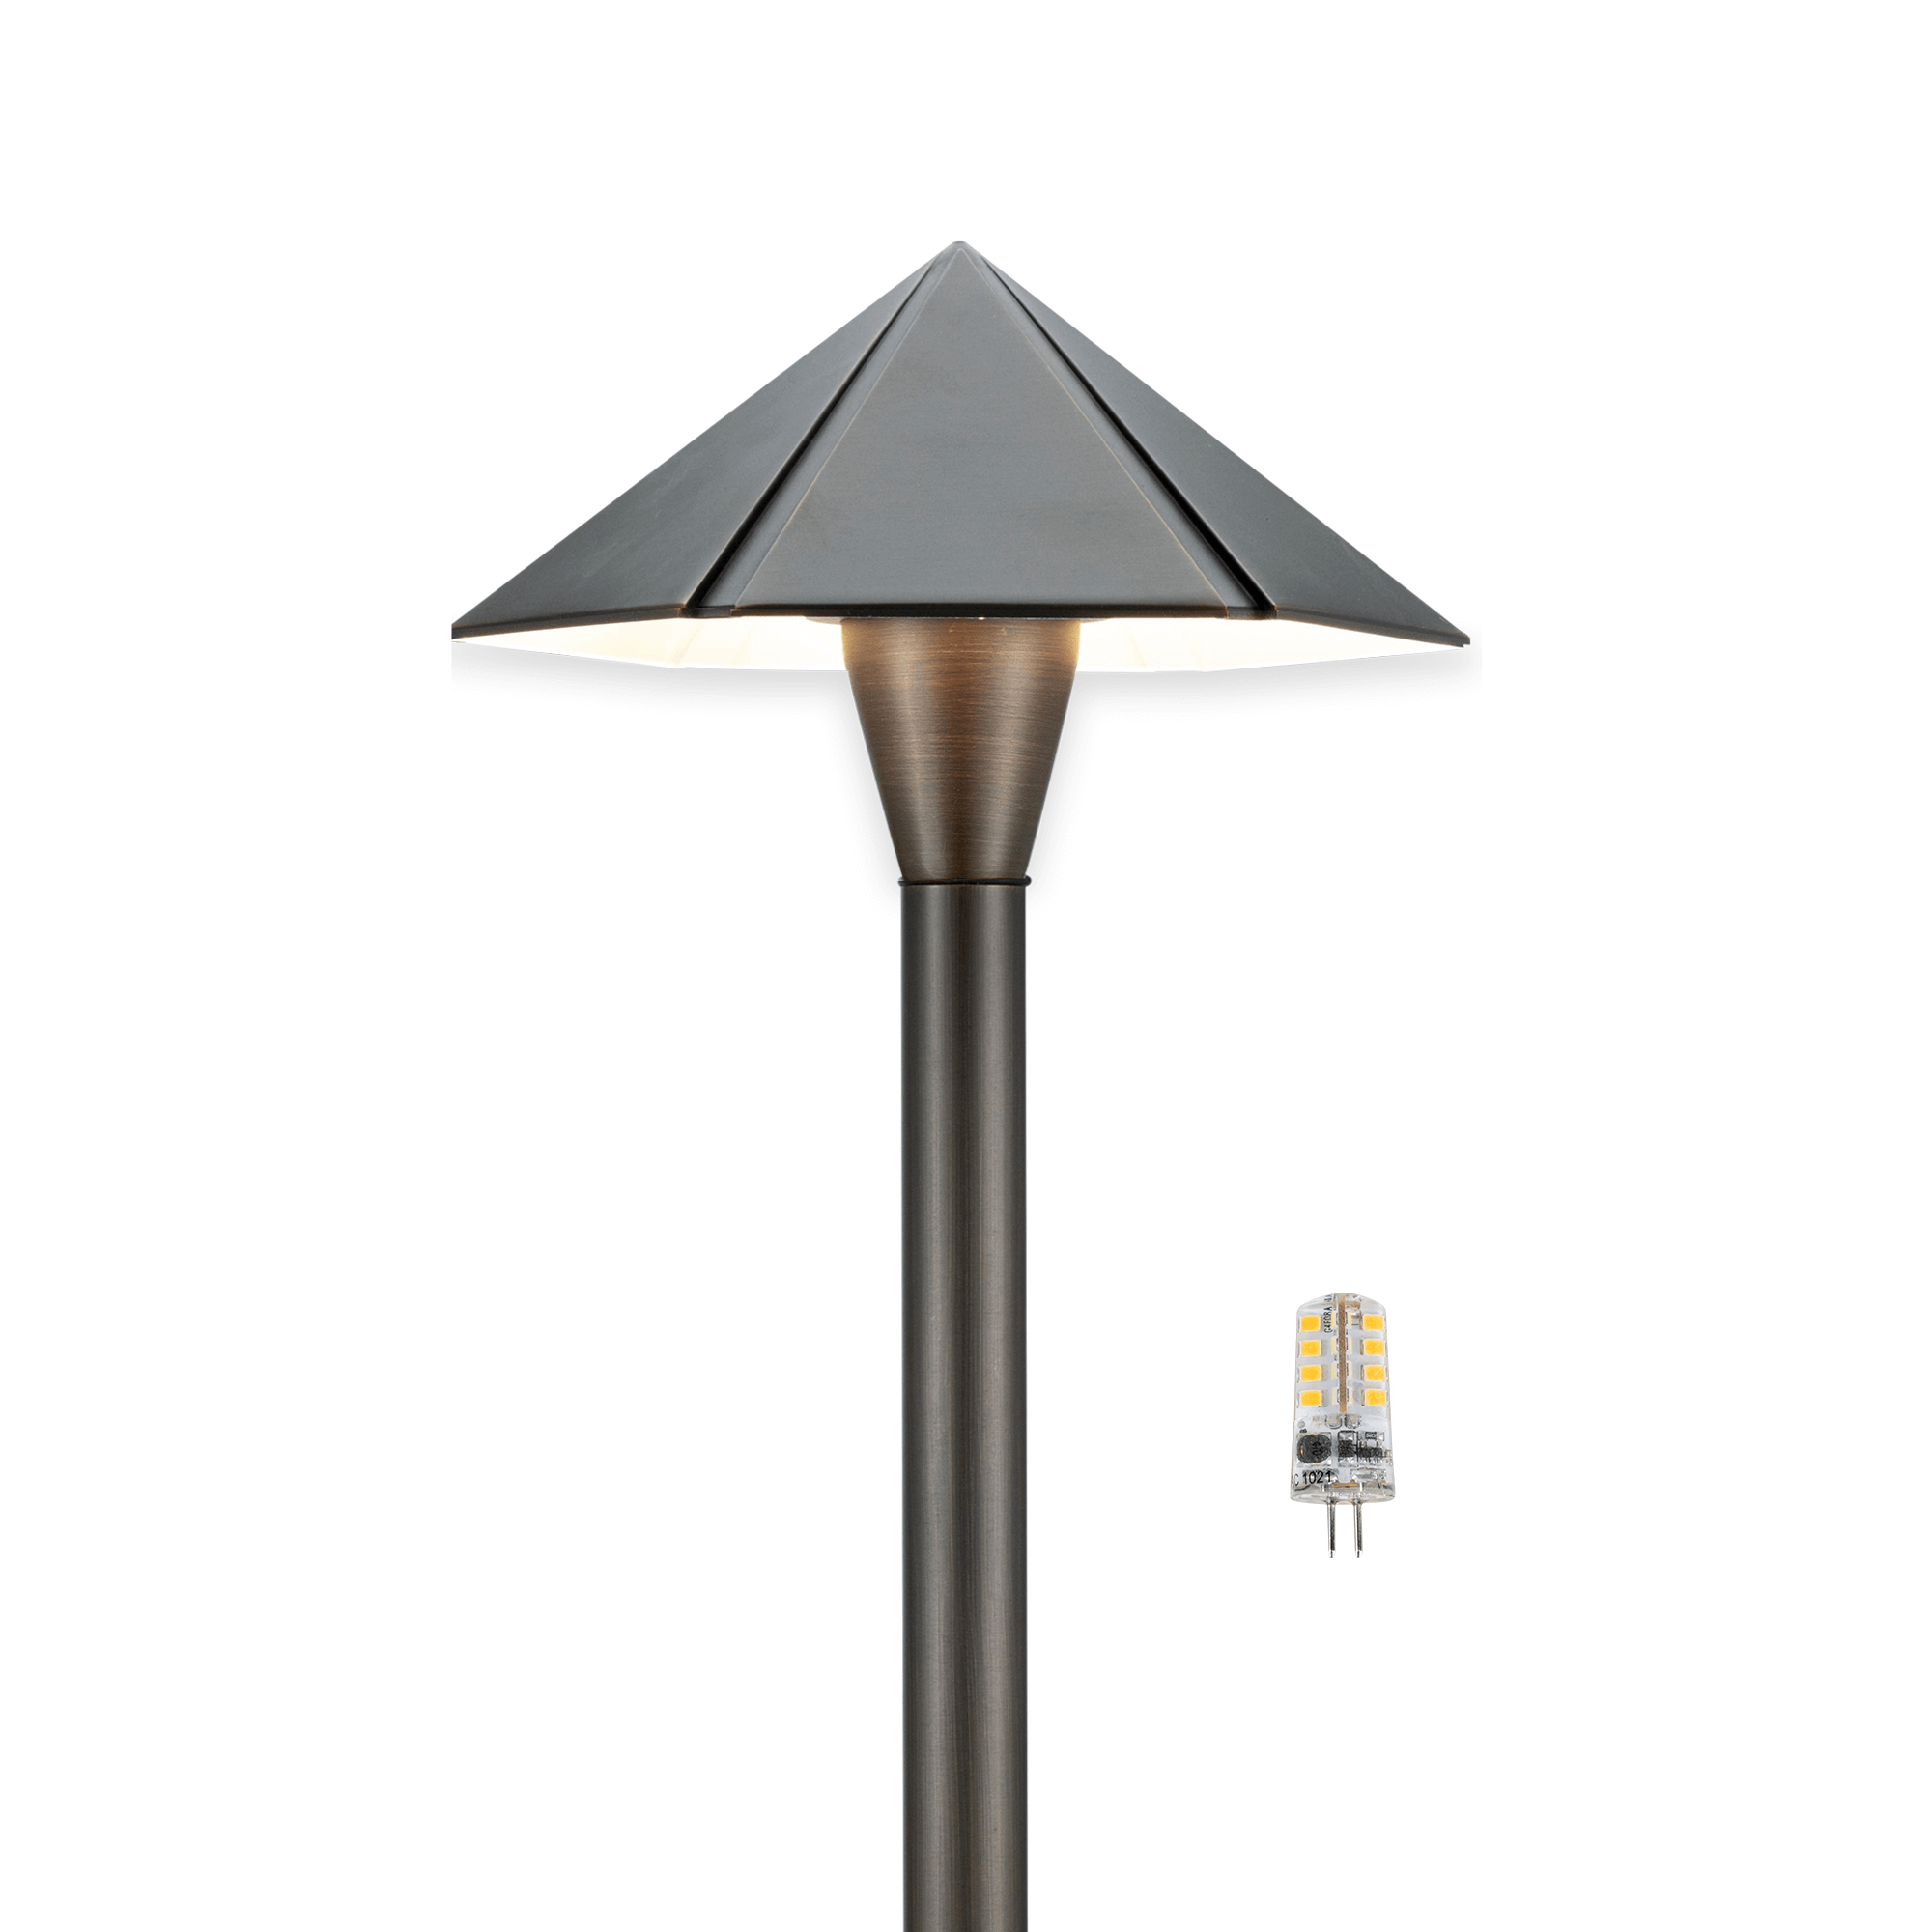 Brass Landscape Light | Waterproof & Easy to Install 1-Pack with Bulb